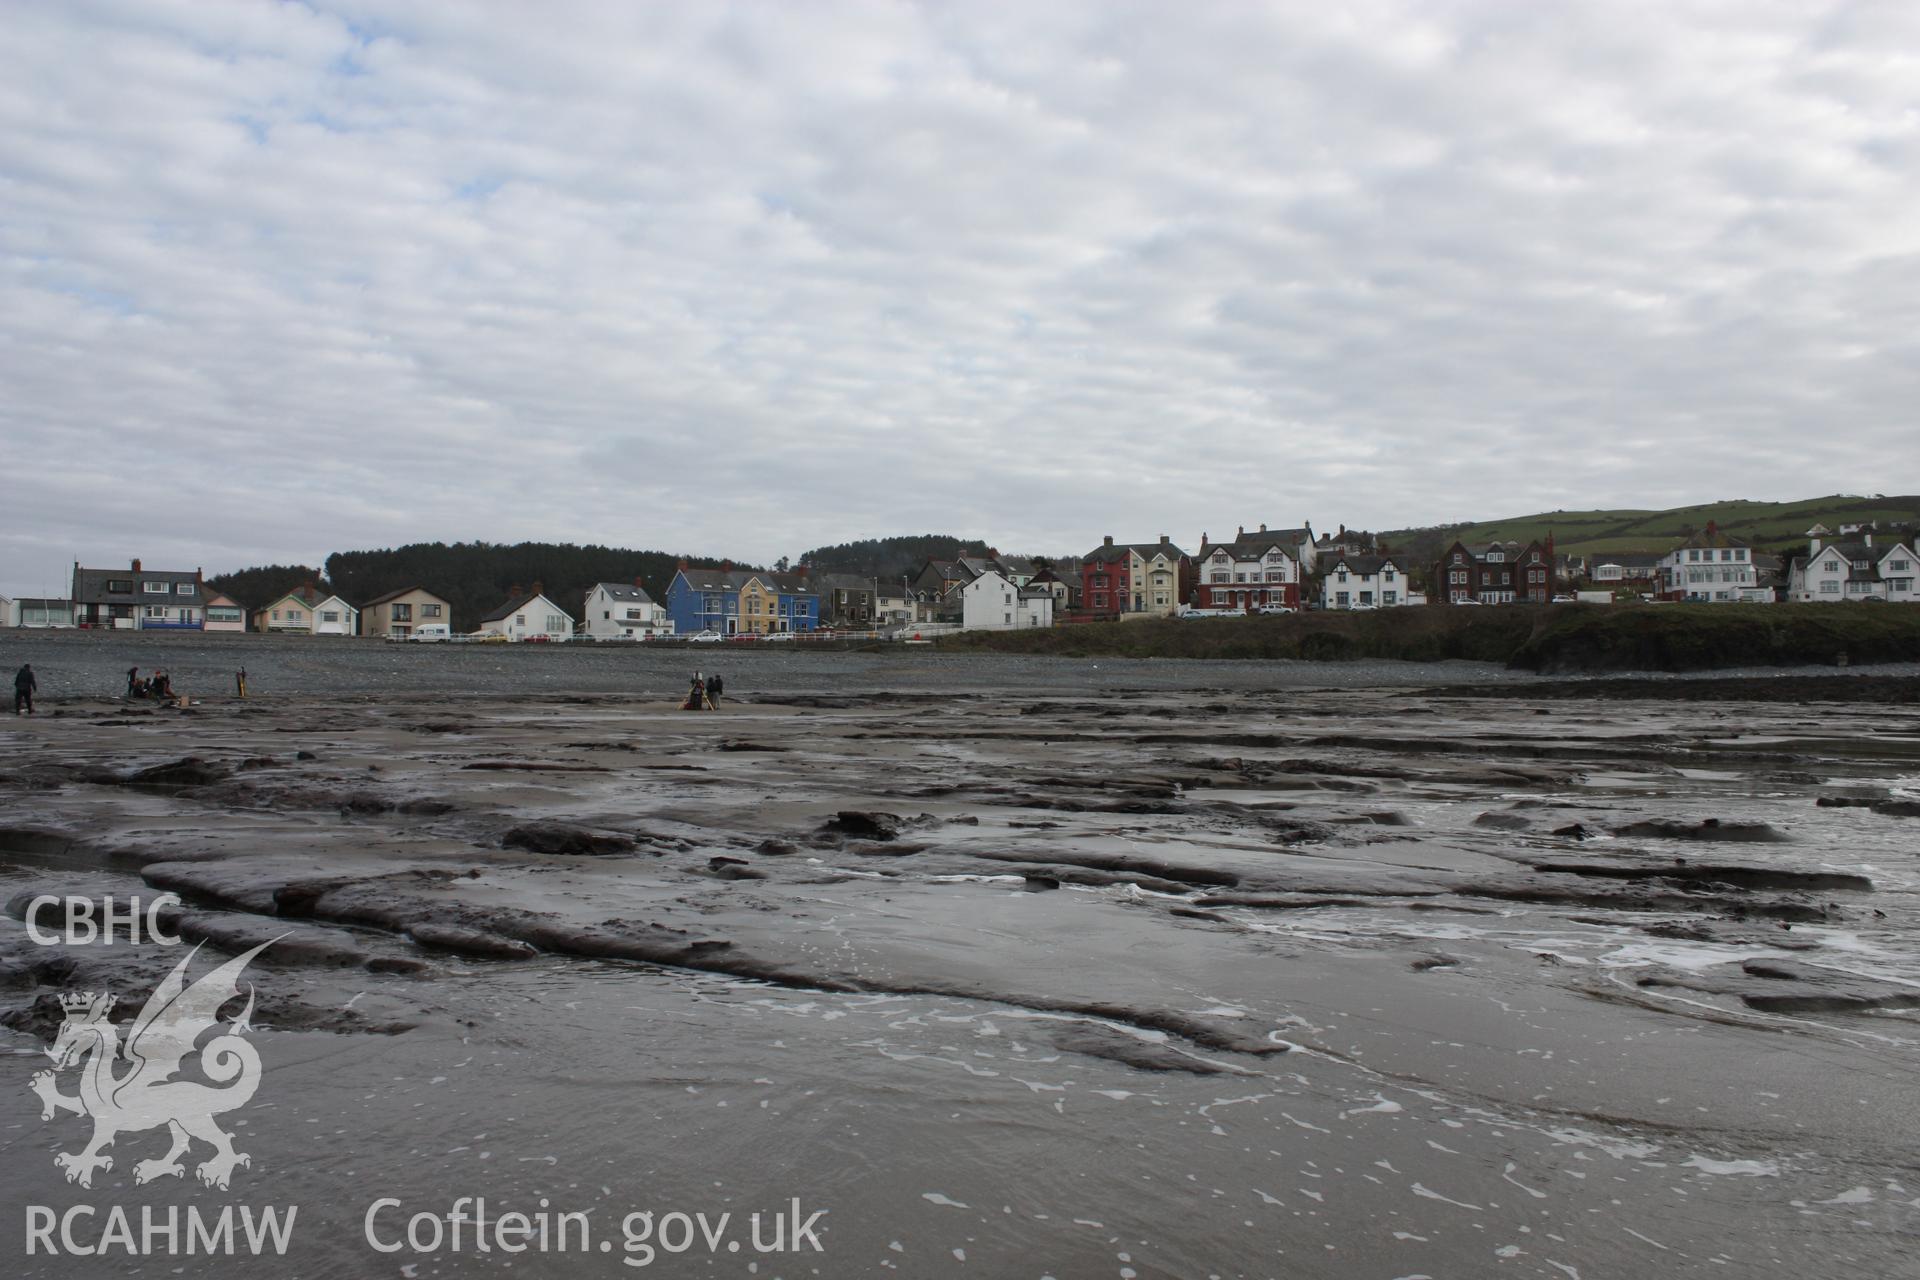 Borth submerged forest (between RNLI lifeboat station and upper Borth), looking southeast towards High Street and Clarach. Showing southern section of peat exposures